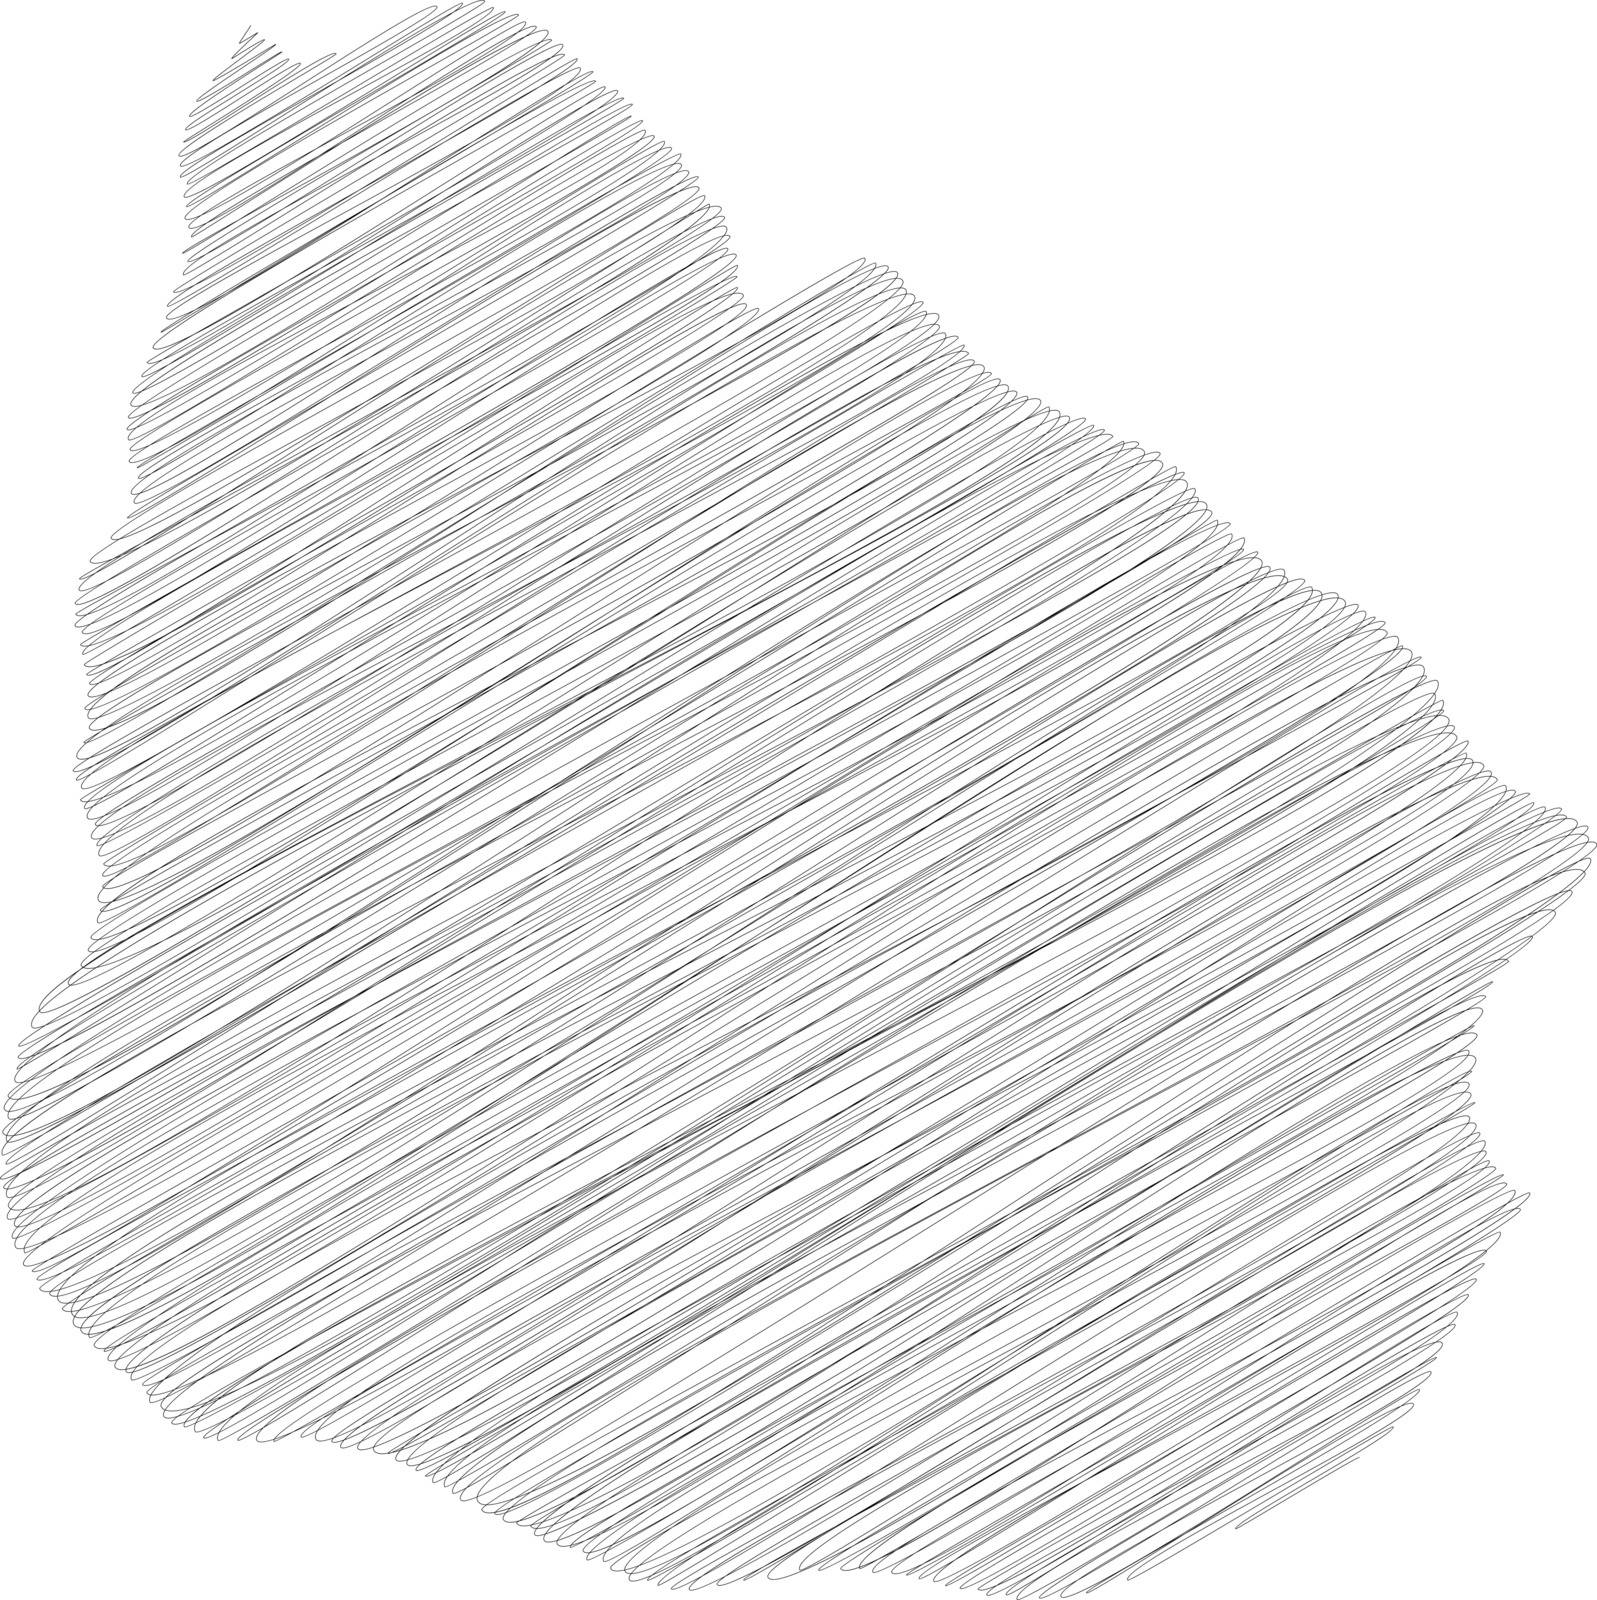 Uruguay - pencil scribble sketch silhouette map of country area with dropped shadow. Simple flat vector illustration.